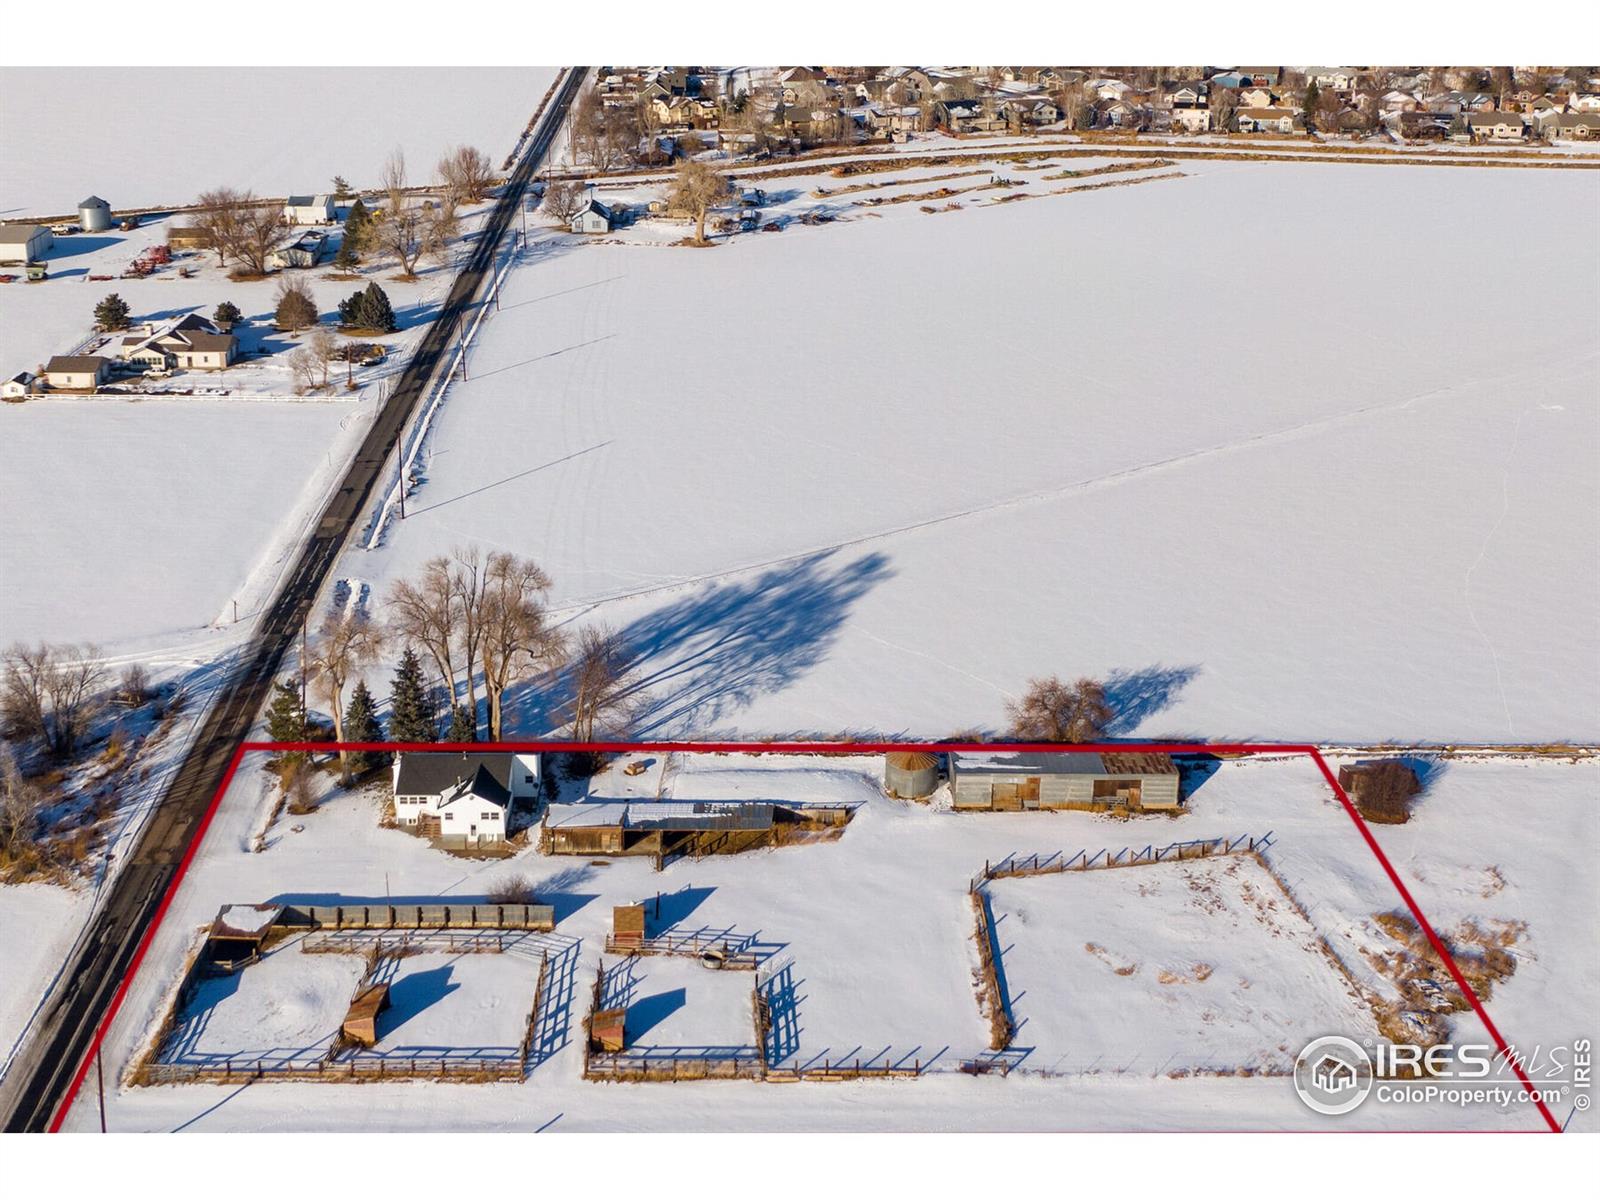 22478 County Road 15, Johnstown, CO